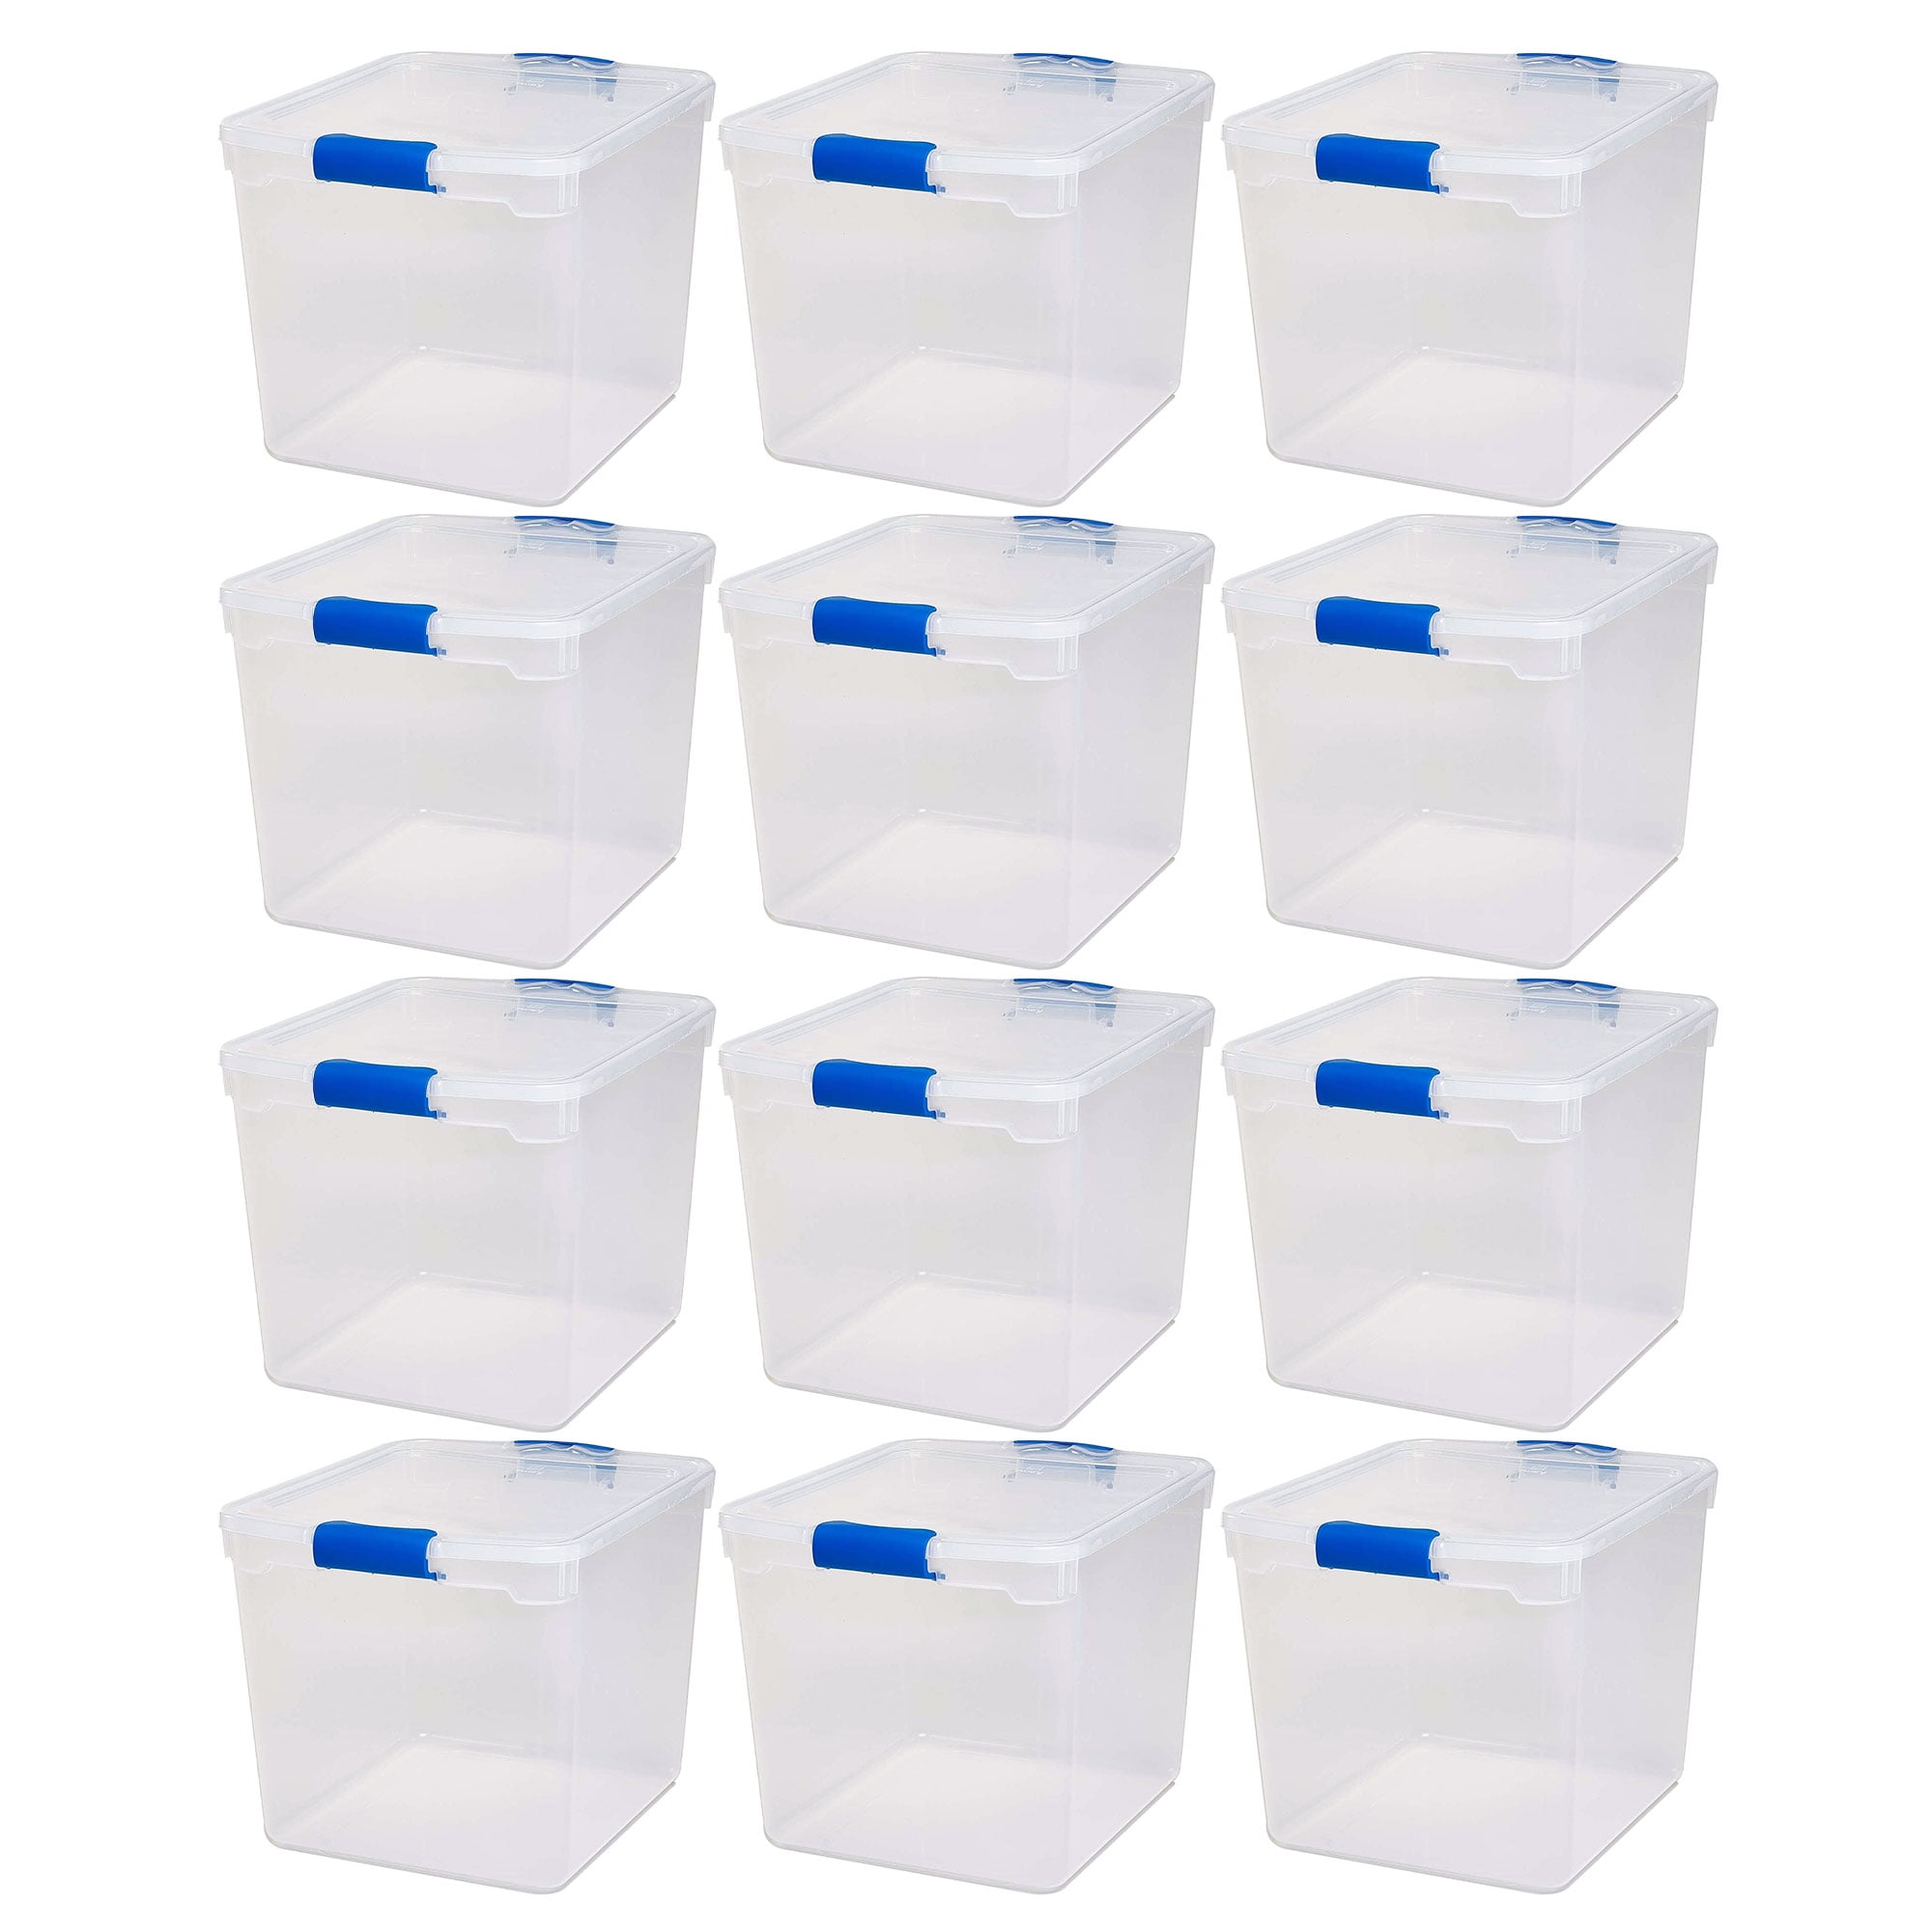 Homz 31 Quart Heavy Duty Clear Plastic Stackable Storage Containers, 12 Pk